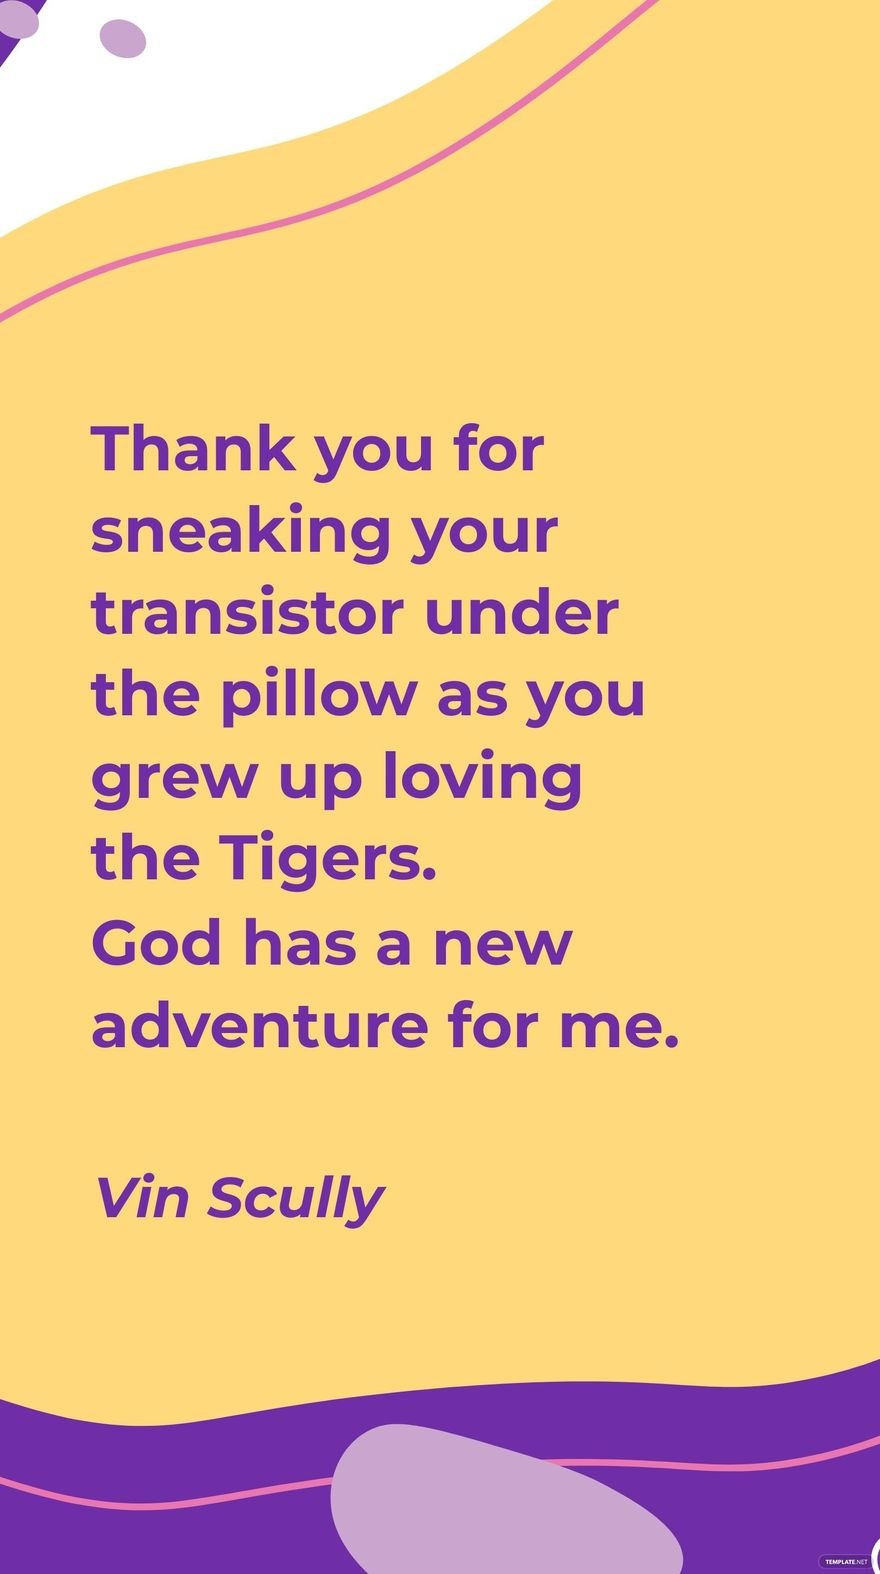 Free Vin Scully - Thank you for sneaking your transistor under the pillow as you grew up loving the Tigers. God has a new adventure for me. in JPG